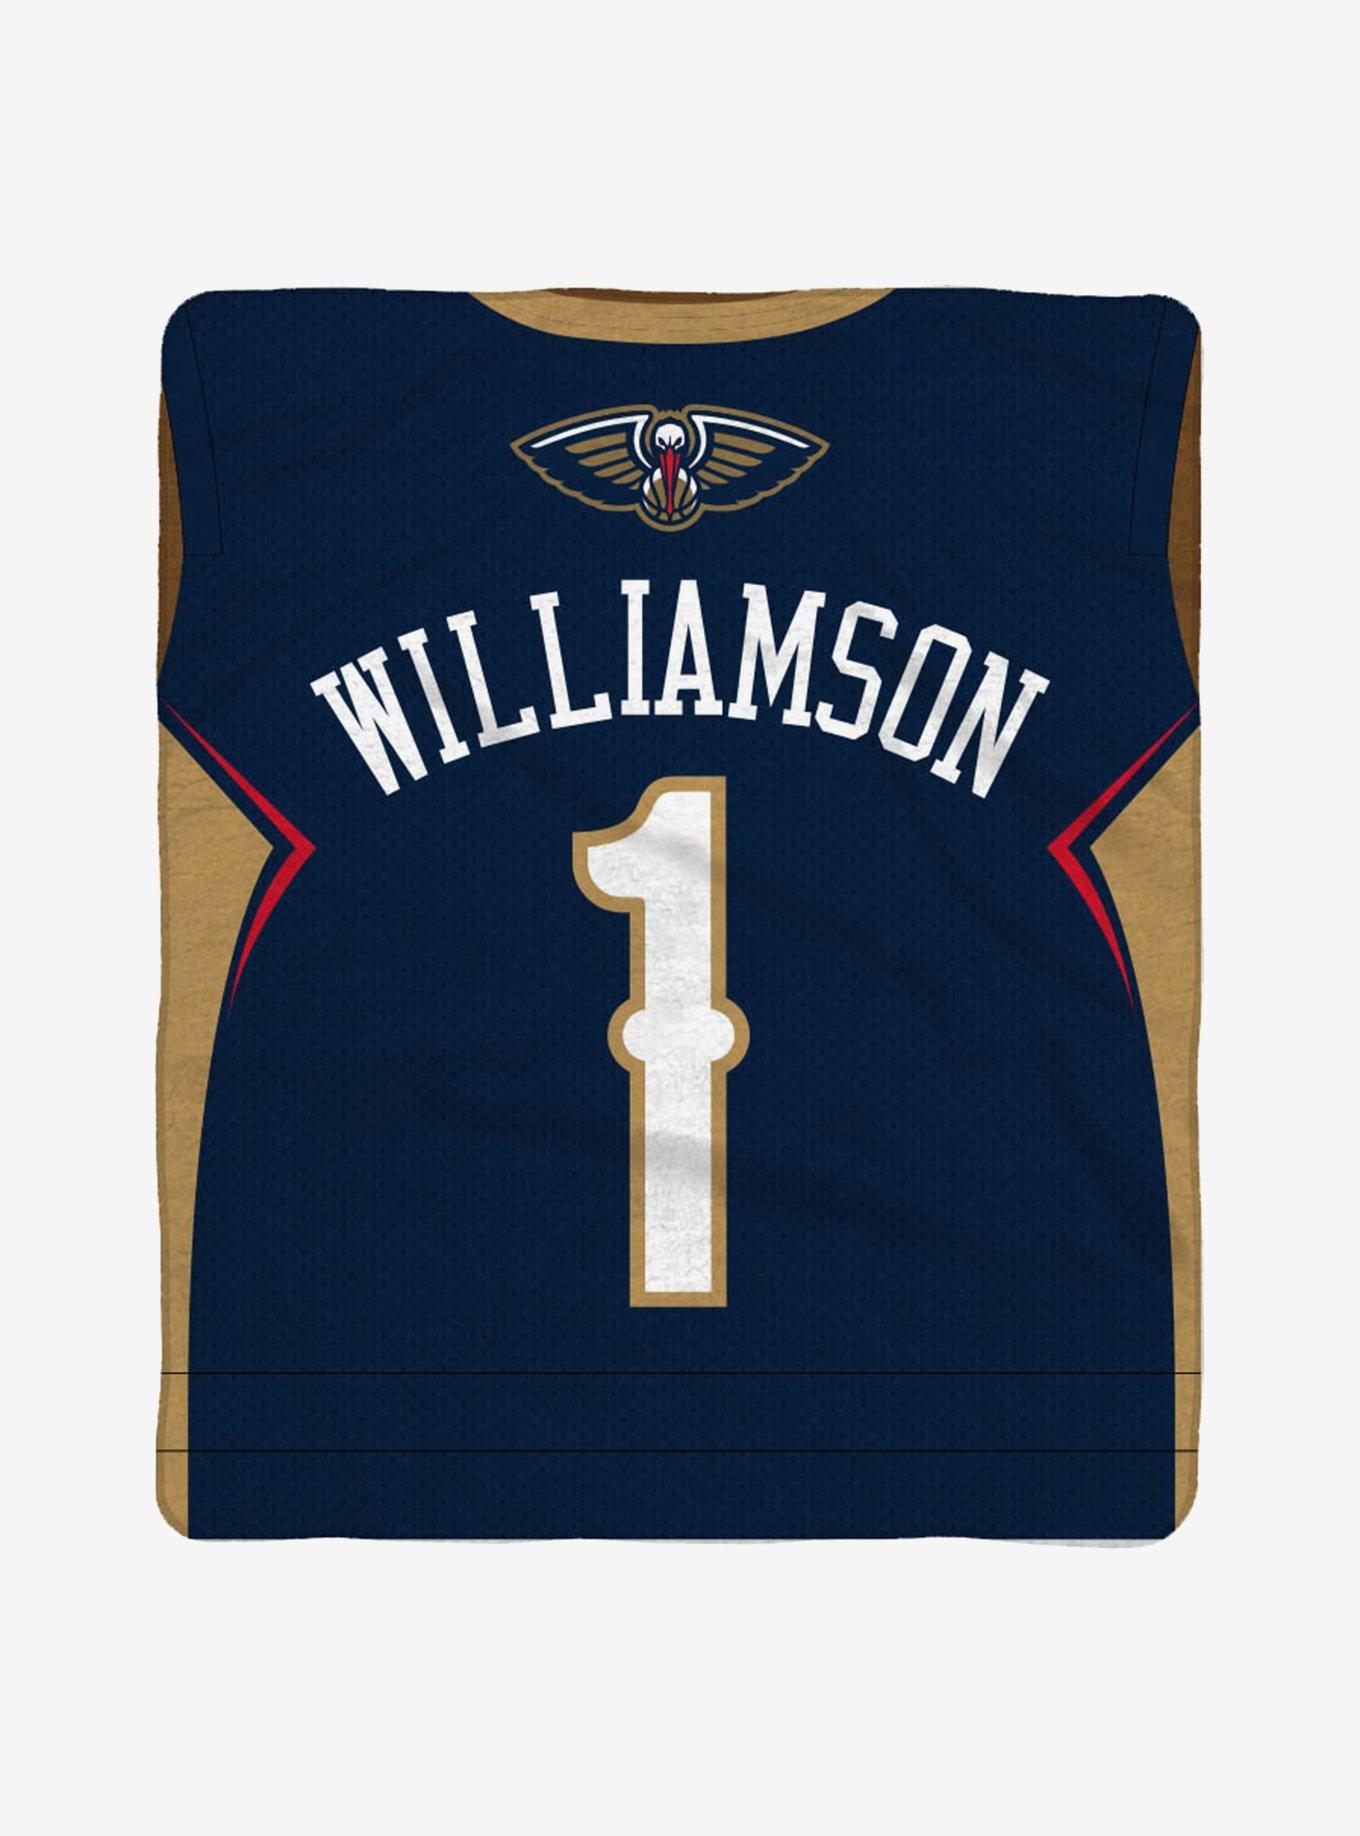 New Orleans Pelicans T-Shirt for Stuffed Animals